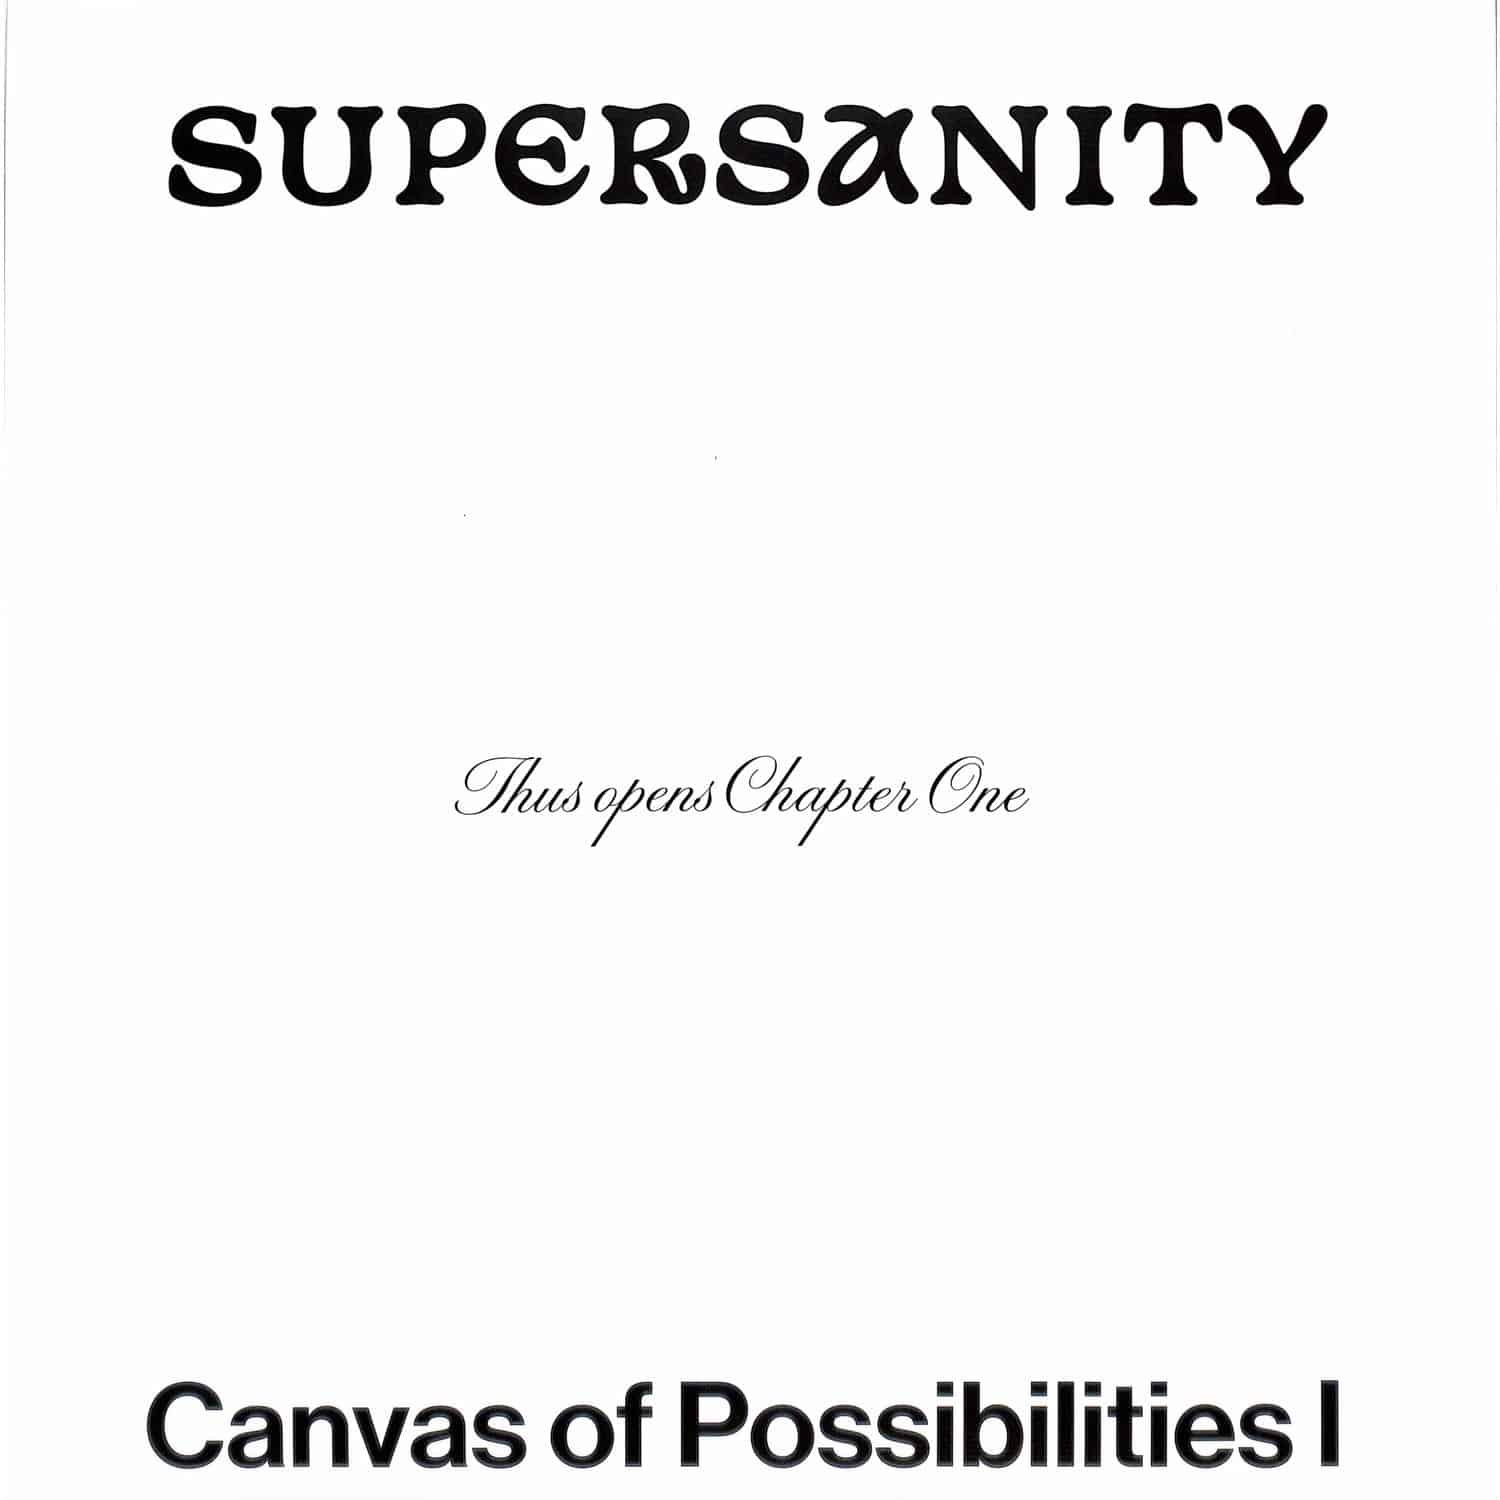 Supersanity - CANVAS OF POSSIBILITIES I